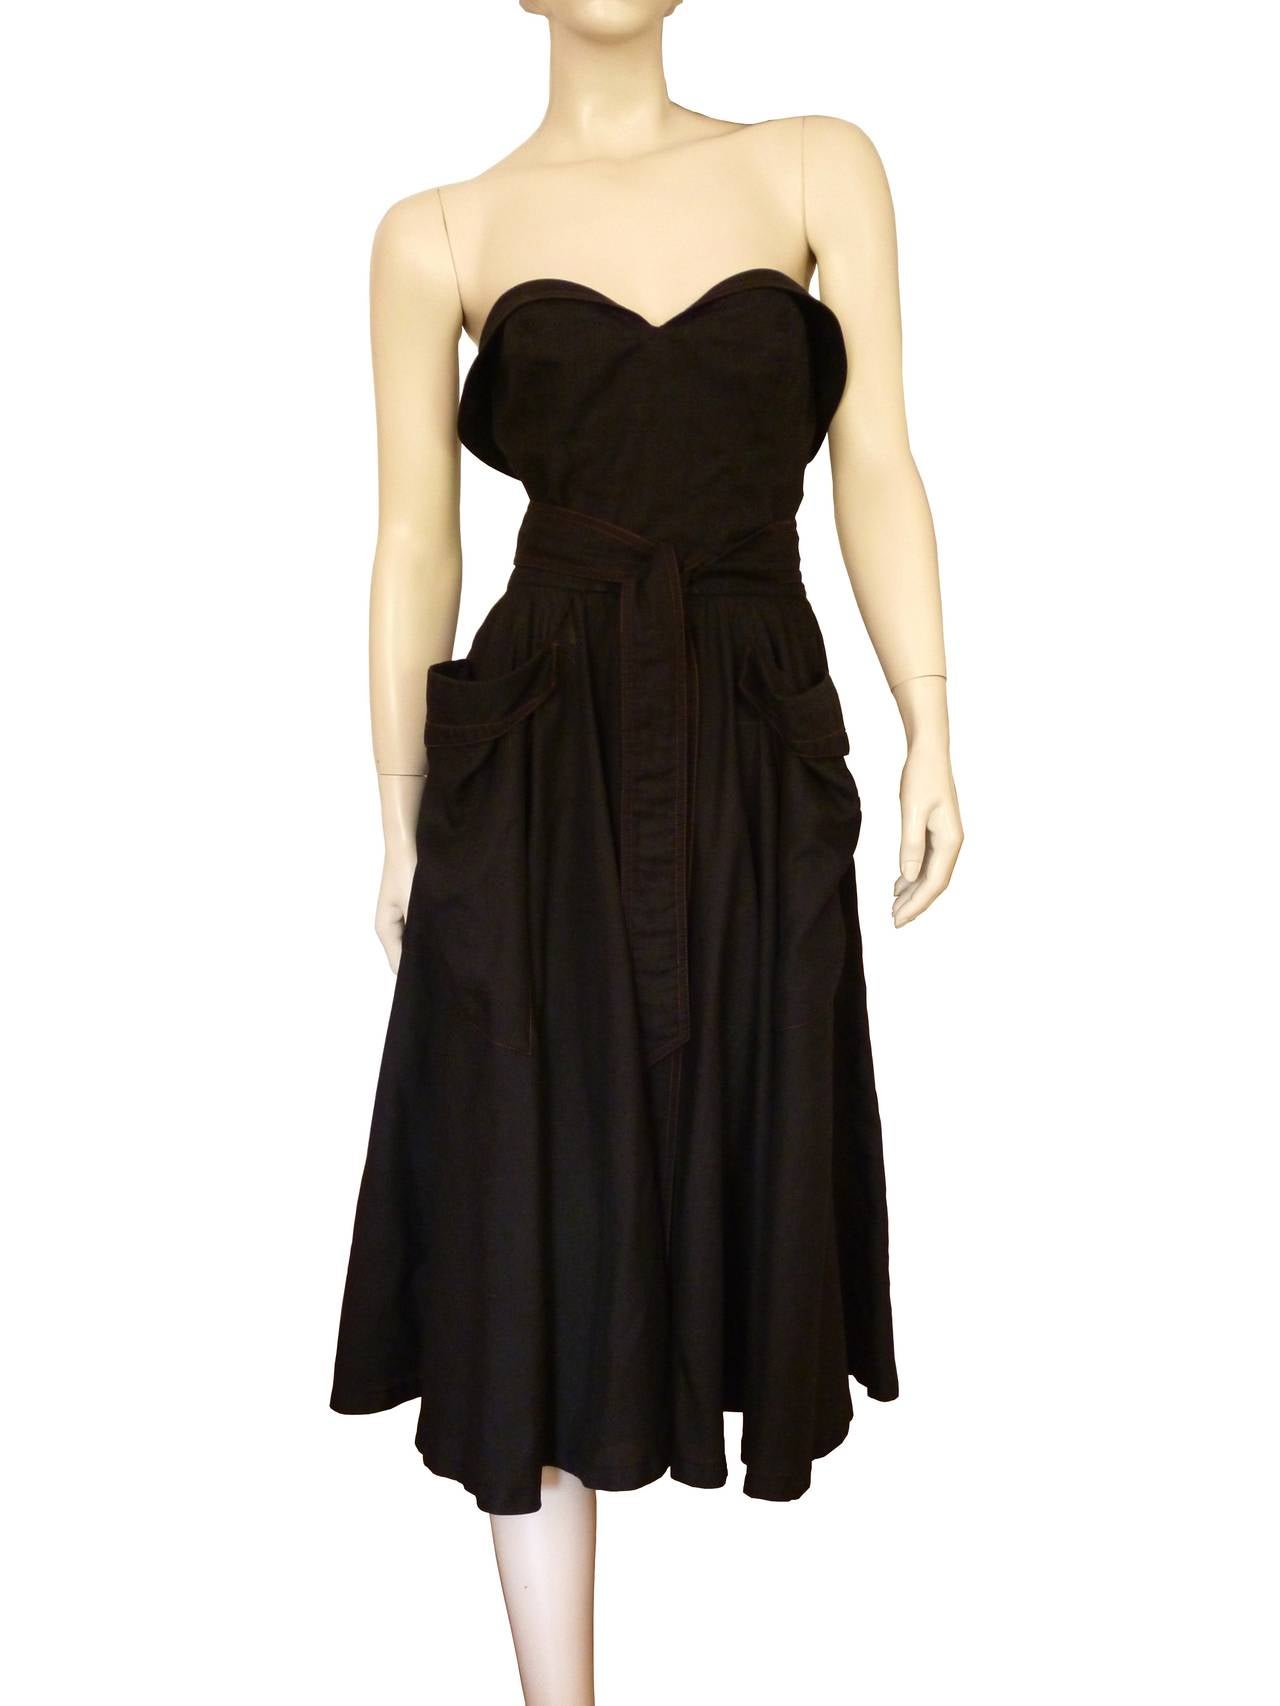 THIERRY MUGLER gorgeous vintage black linen bustier dress.

Two large pockets at the front, a back button closure and a long belt
 Red stitching detail.

Label reads 